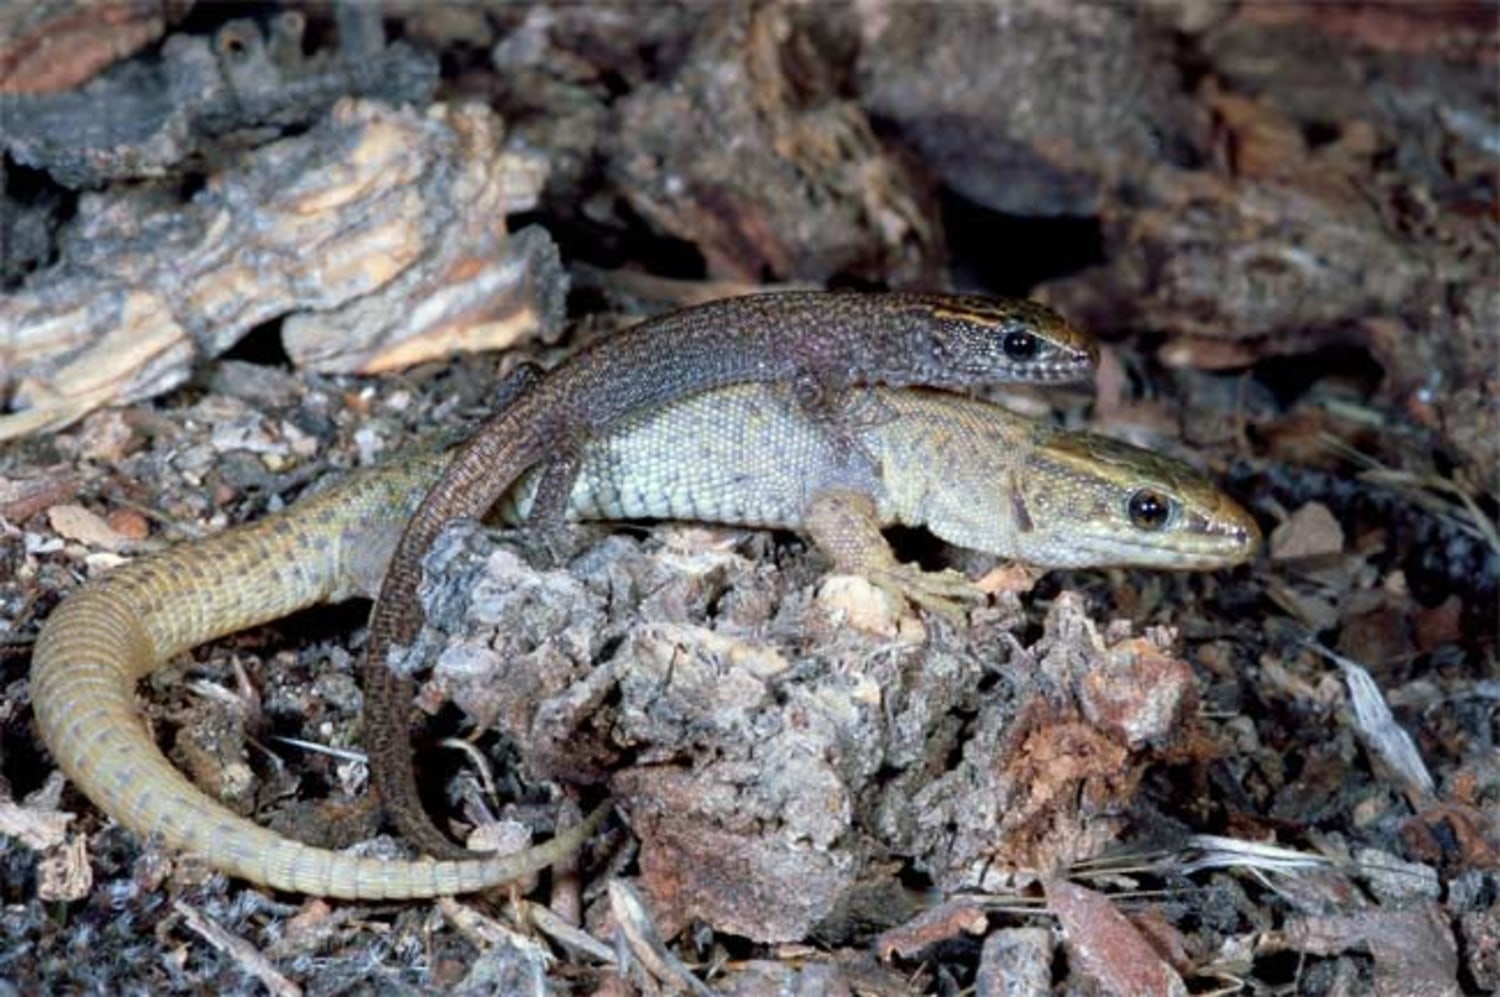 Lizards that live in families discovered